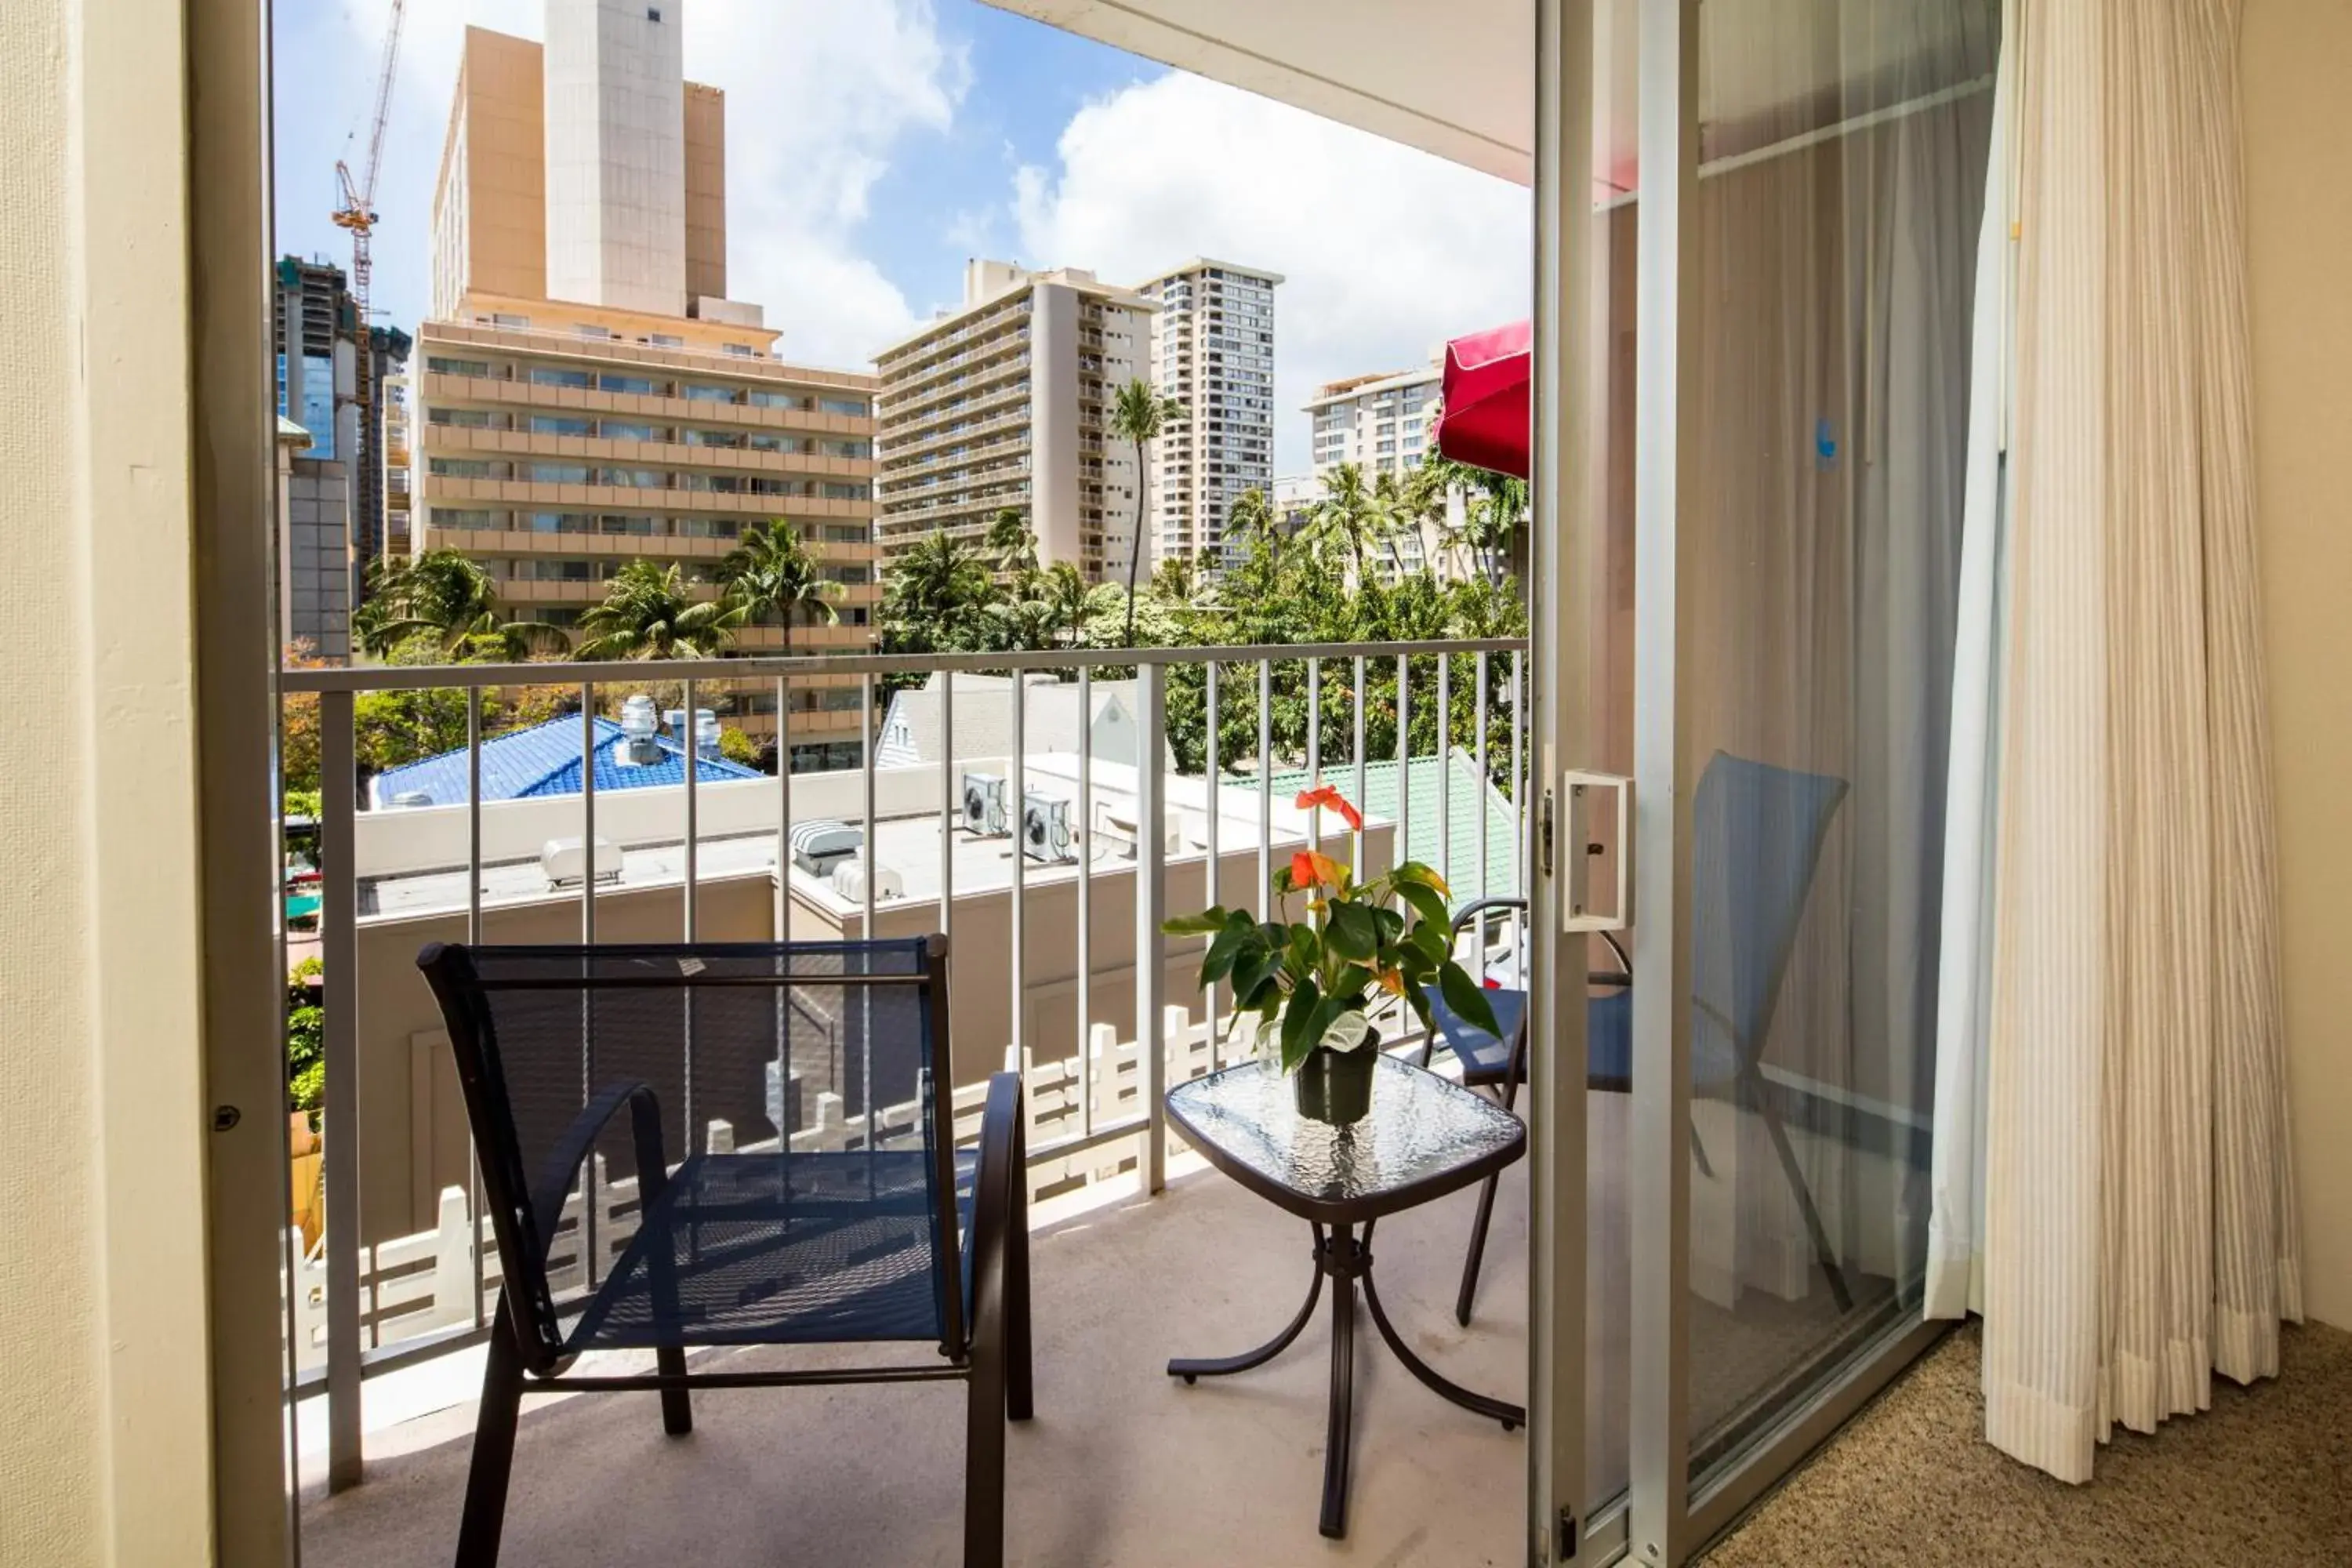 Patio, Balcony/Terrace in Tropical Studios at Marine Surf Waikiki - FREE PARKING - BEST LOCATION - FULL KITCHEN - SWIMMING POOL